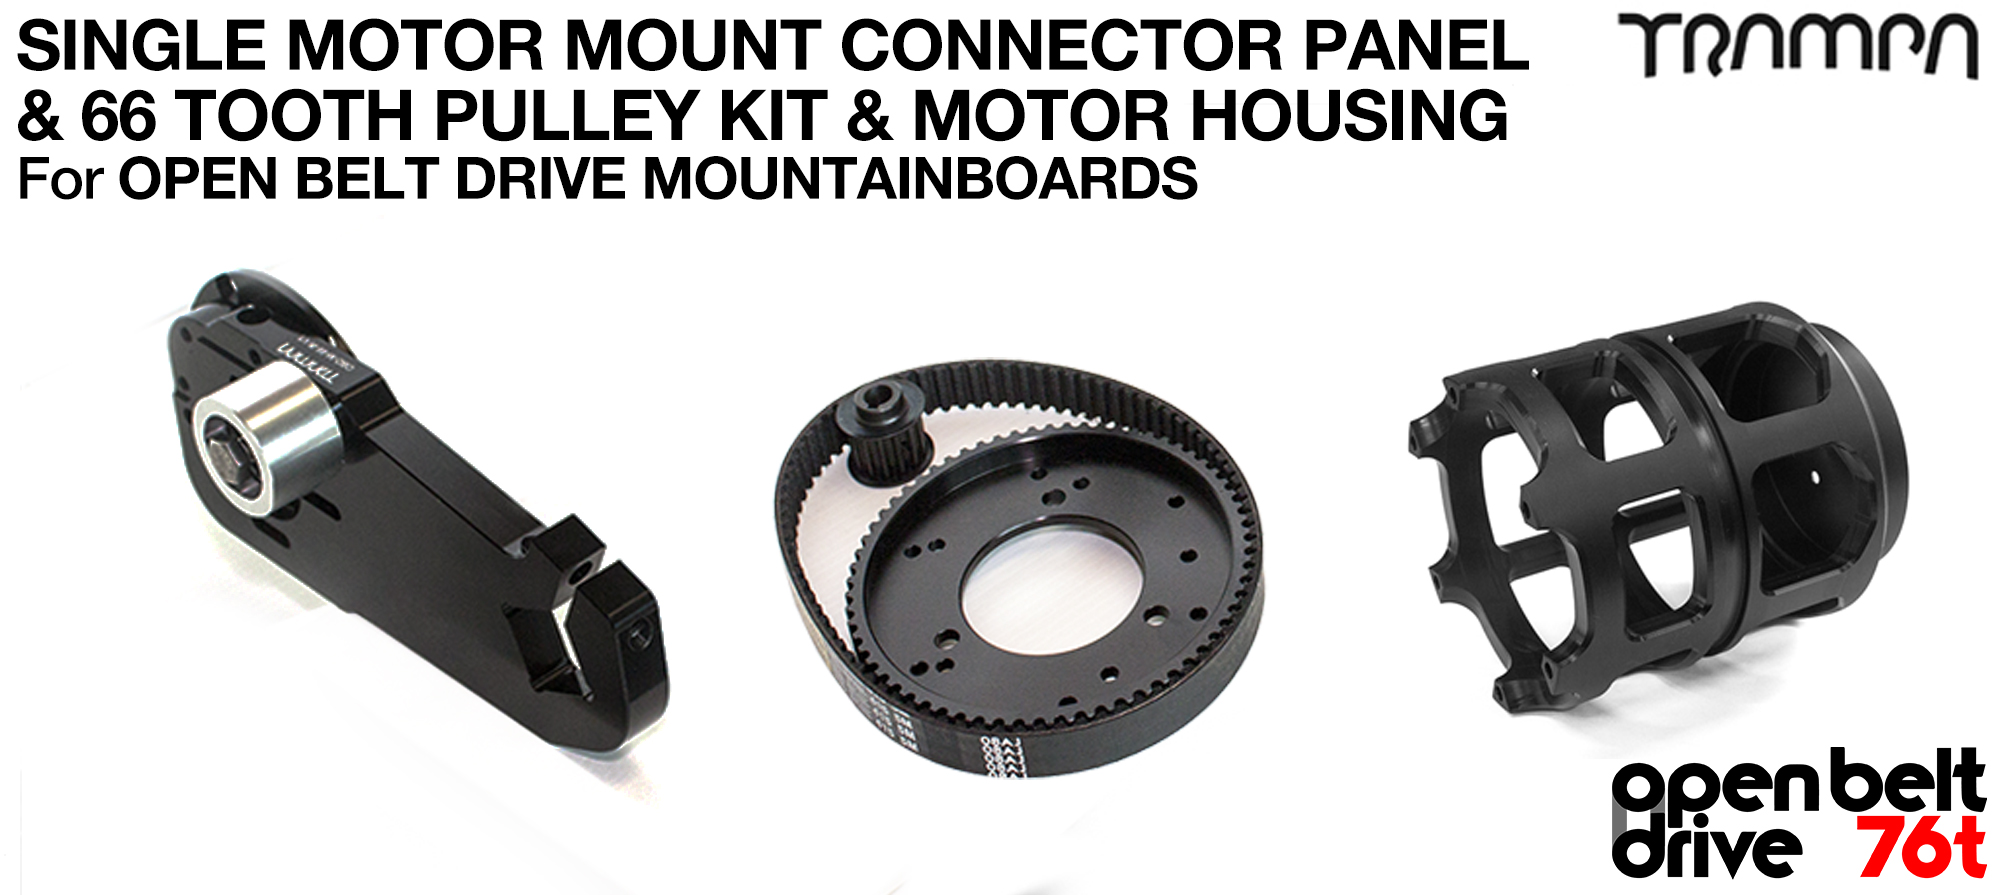 76T OBD Motor Mount with 76 tooth Pulley Kit & Motor Protection - SINGLE